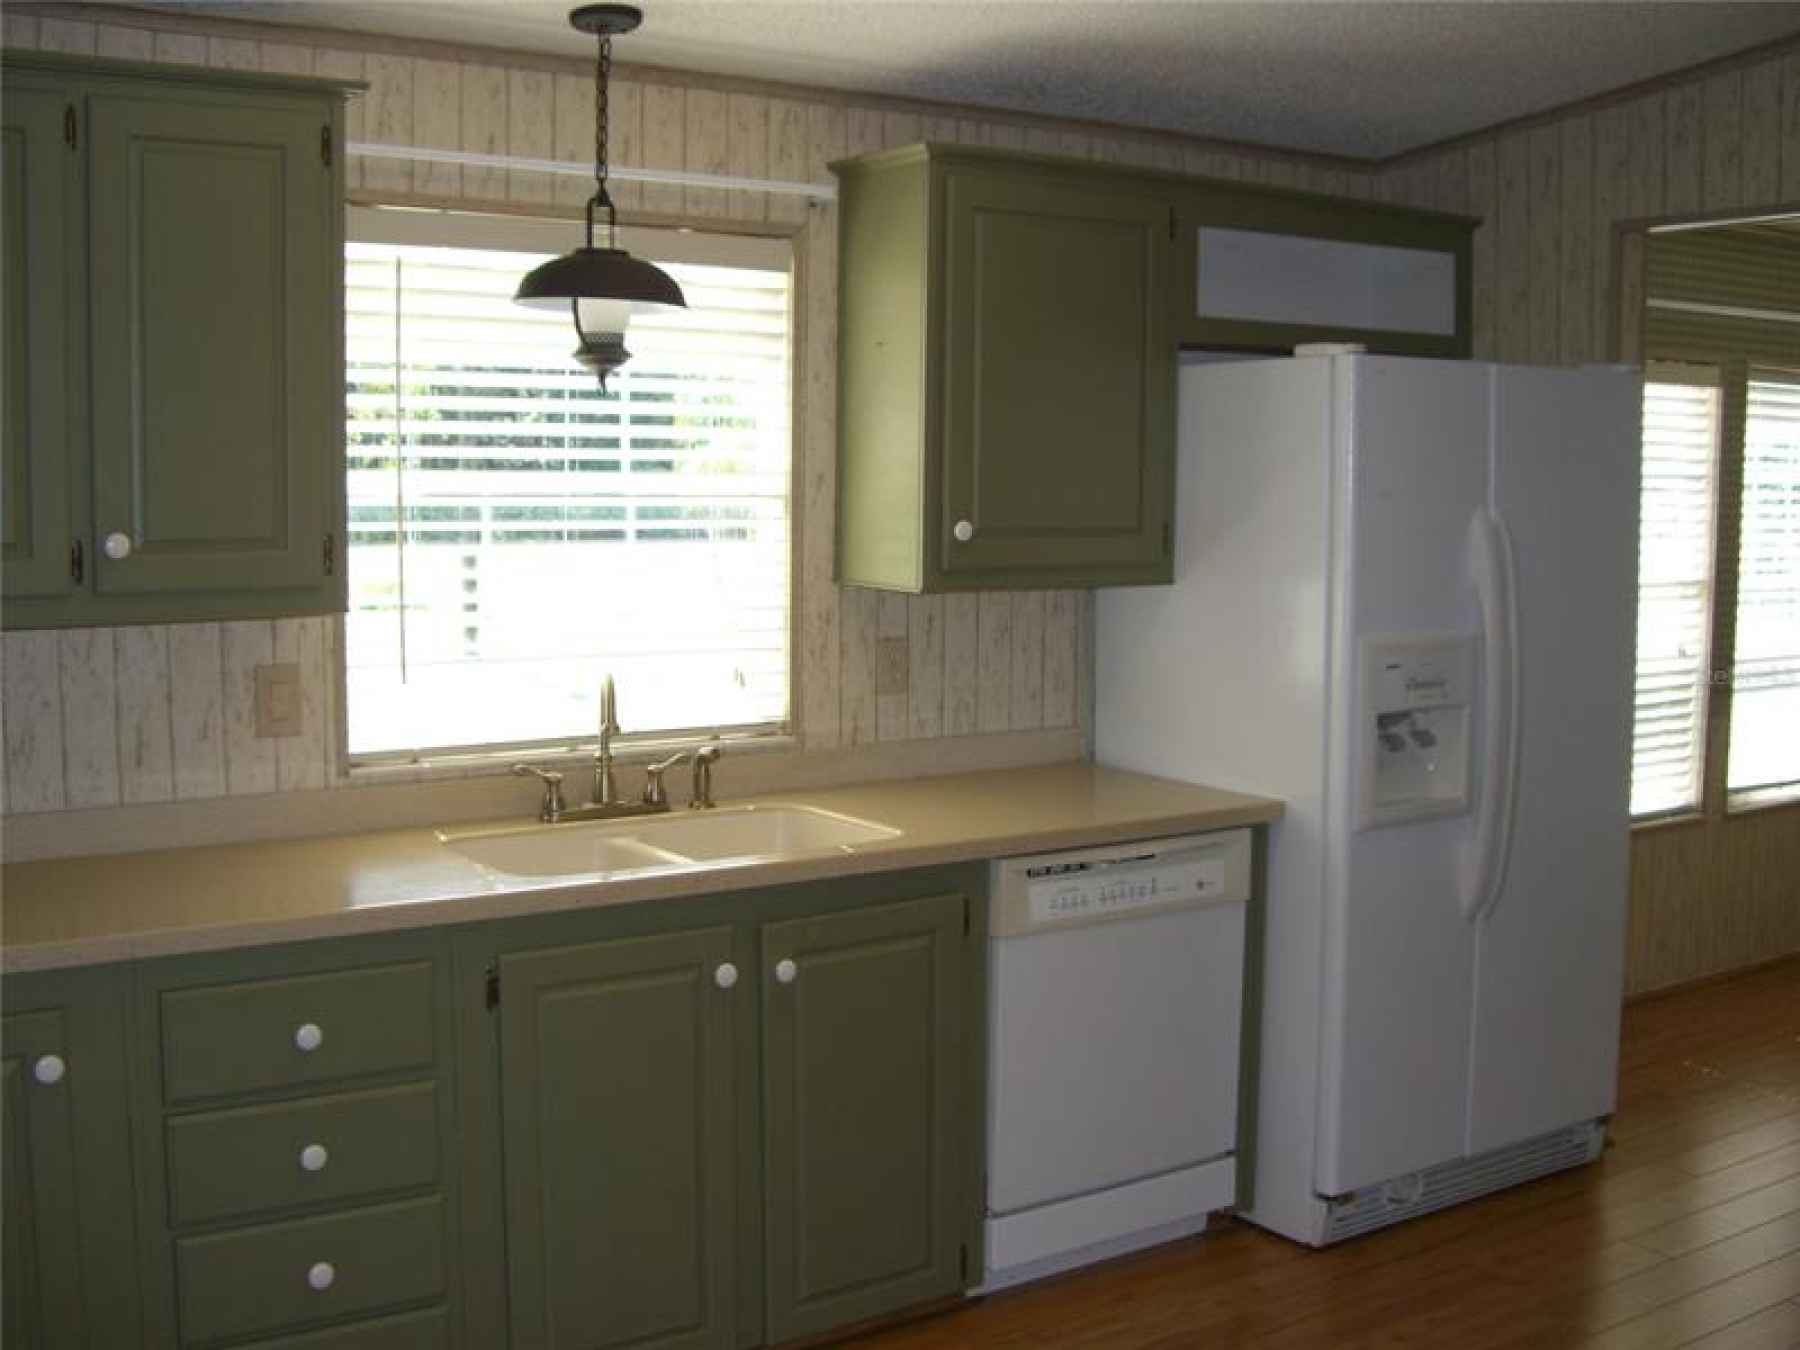 KITCHEN INCLUDES DISHWASHER AND REFRIGERATOR. LOVE THE WINDOW OVER THE SINK